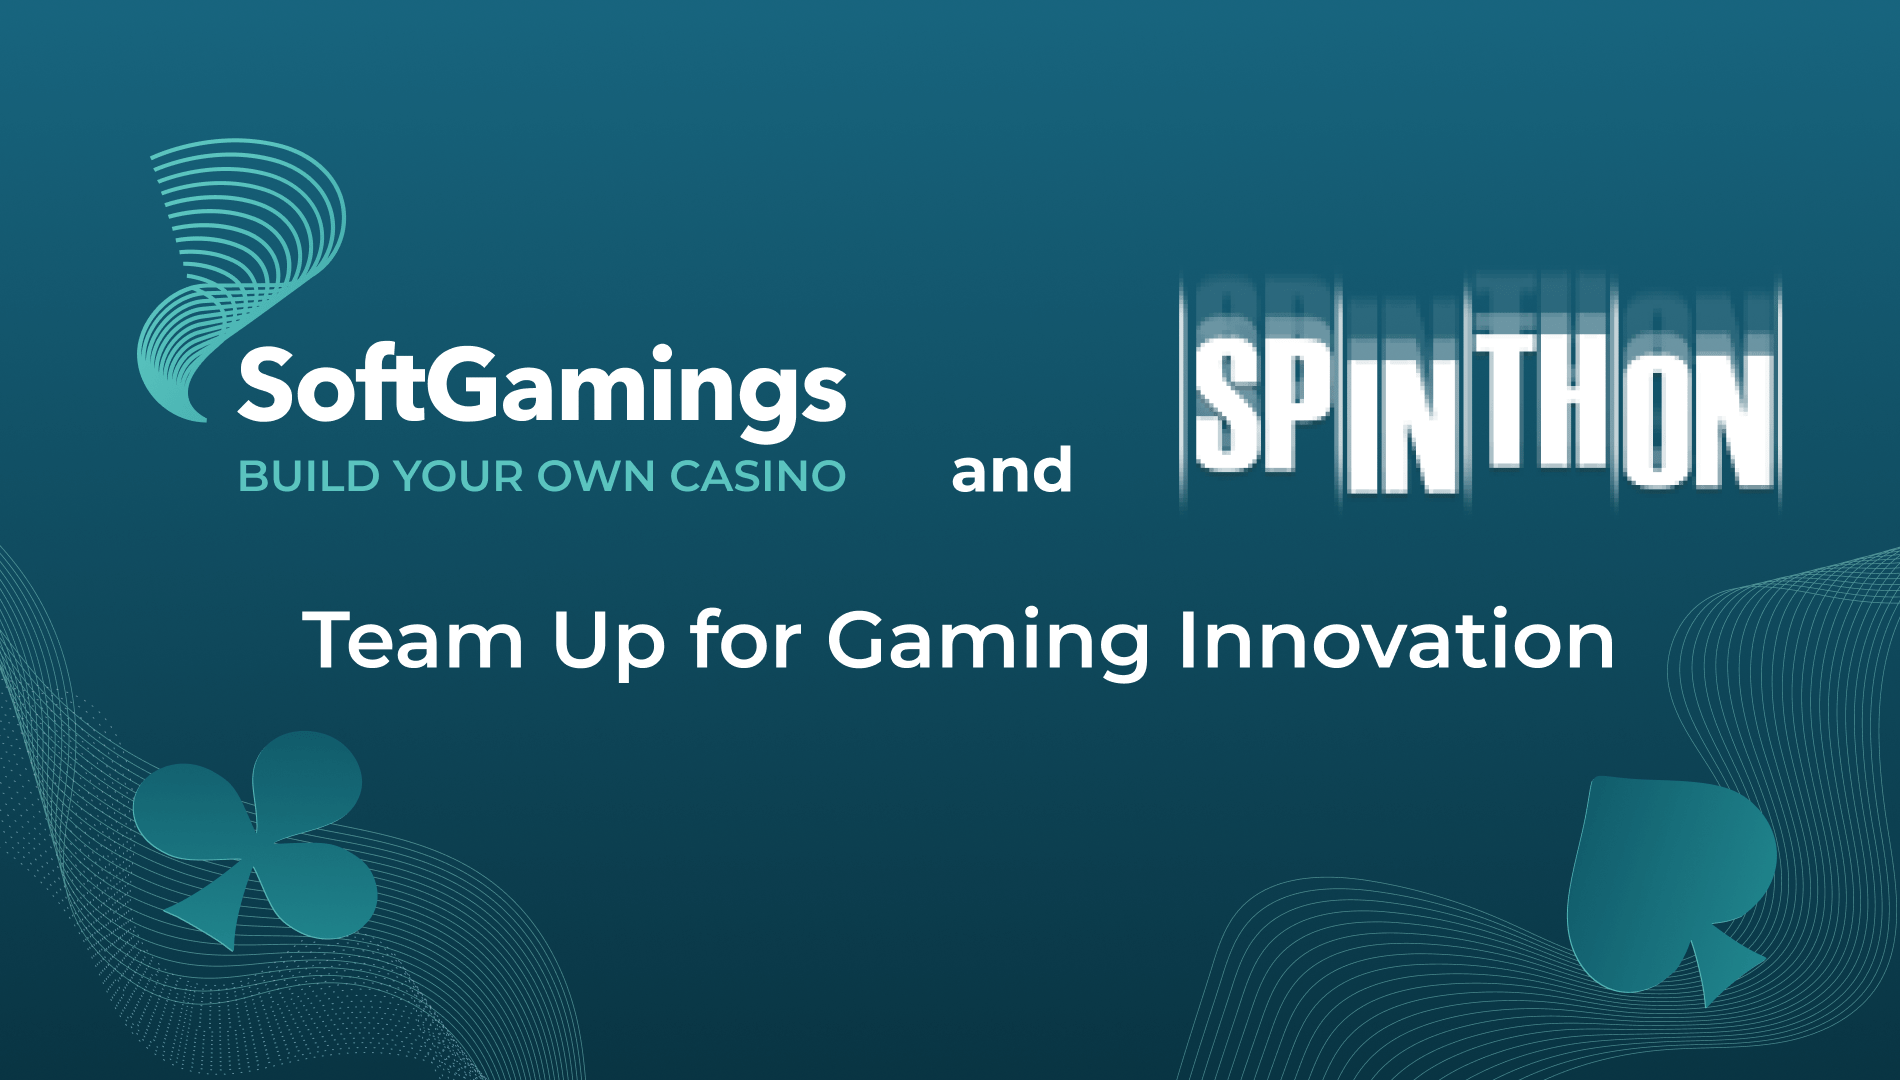 Spinthon and SoftGamings team up for gaming innovation